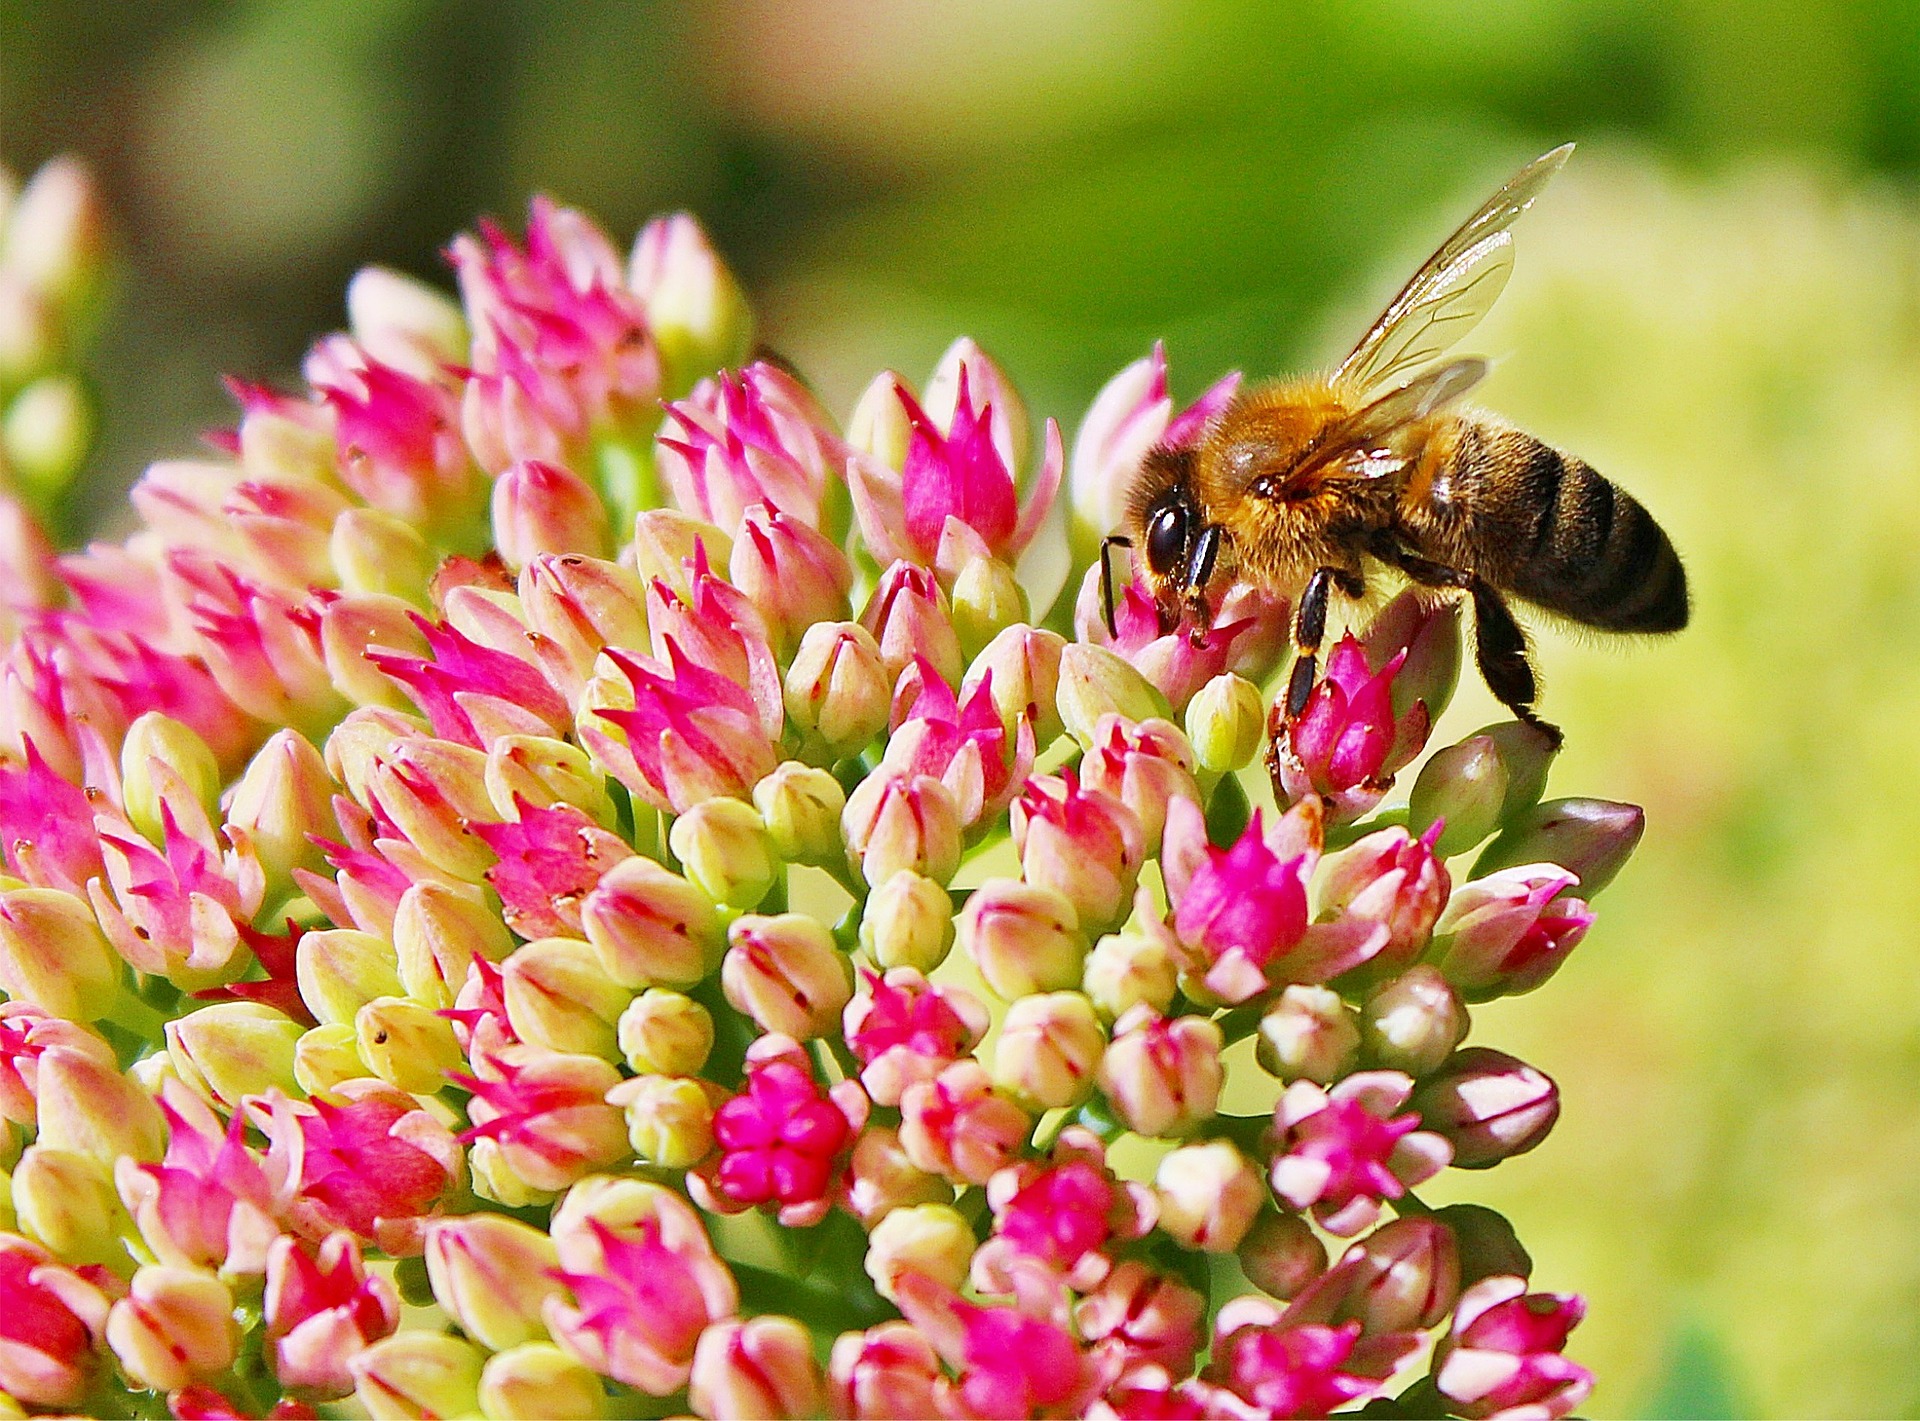 Pollinators, such as bees and butterflies, play a big part in getting our gardens to grow. They help fertilize flowers, carrying pollen from one plant to another.